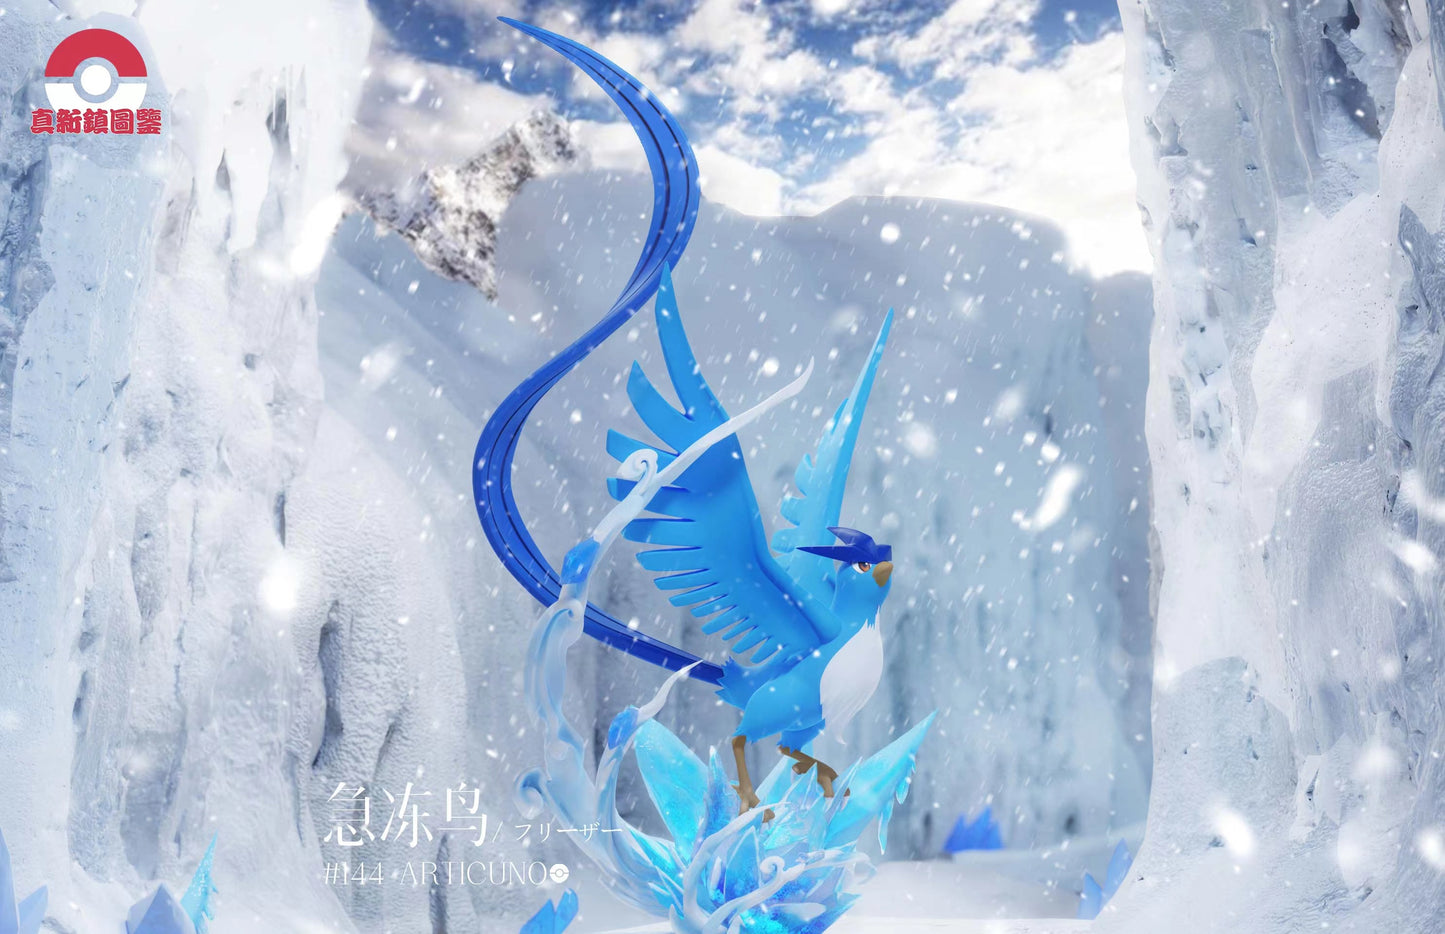 〖Sold Out〗Pokemon Scale World Articuno #144 1:20 - Pallet Town Studio